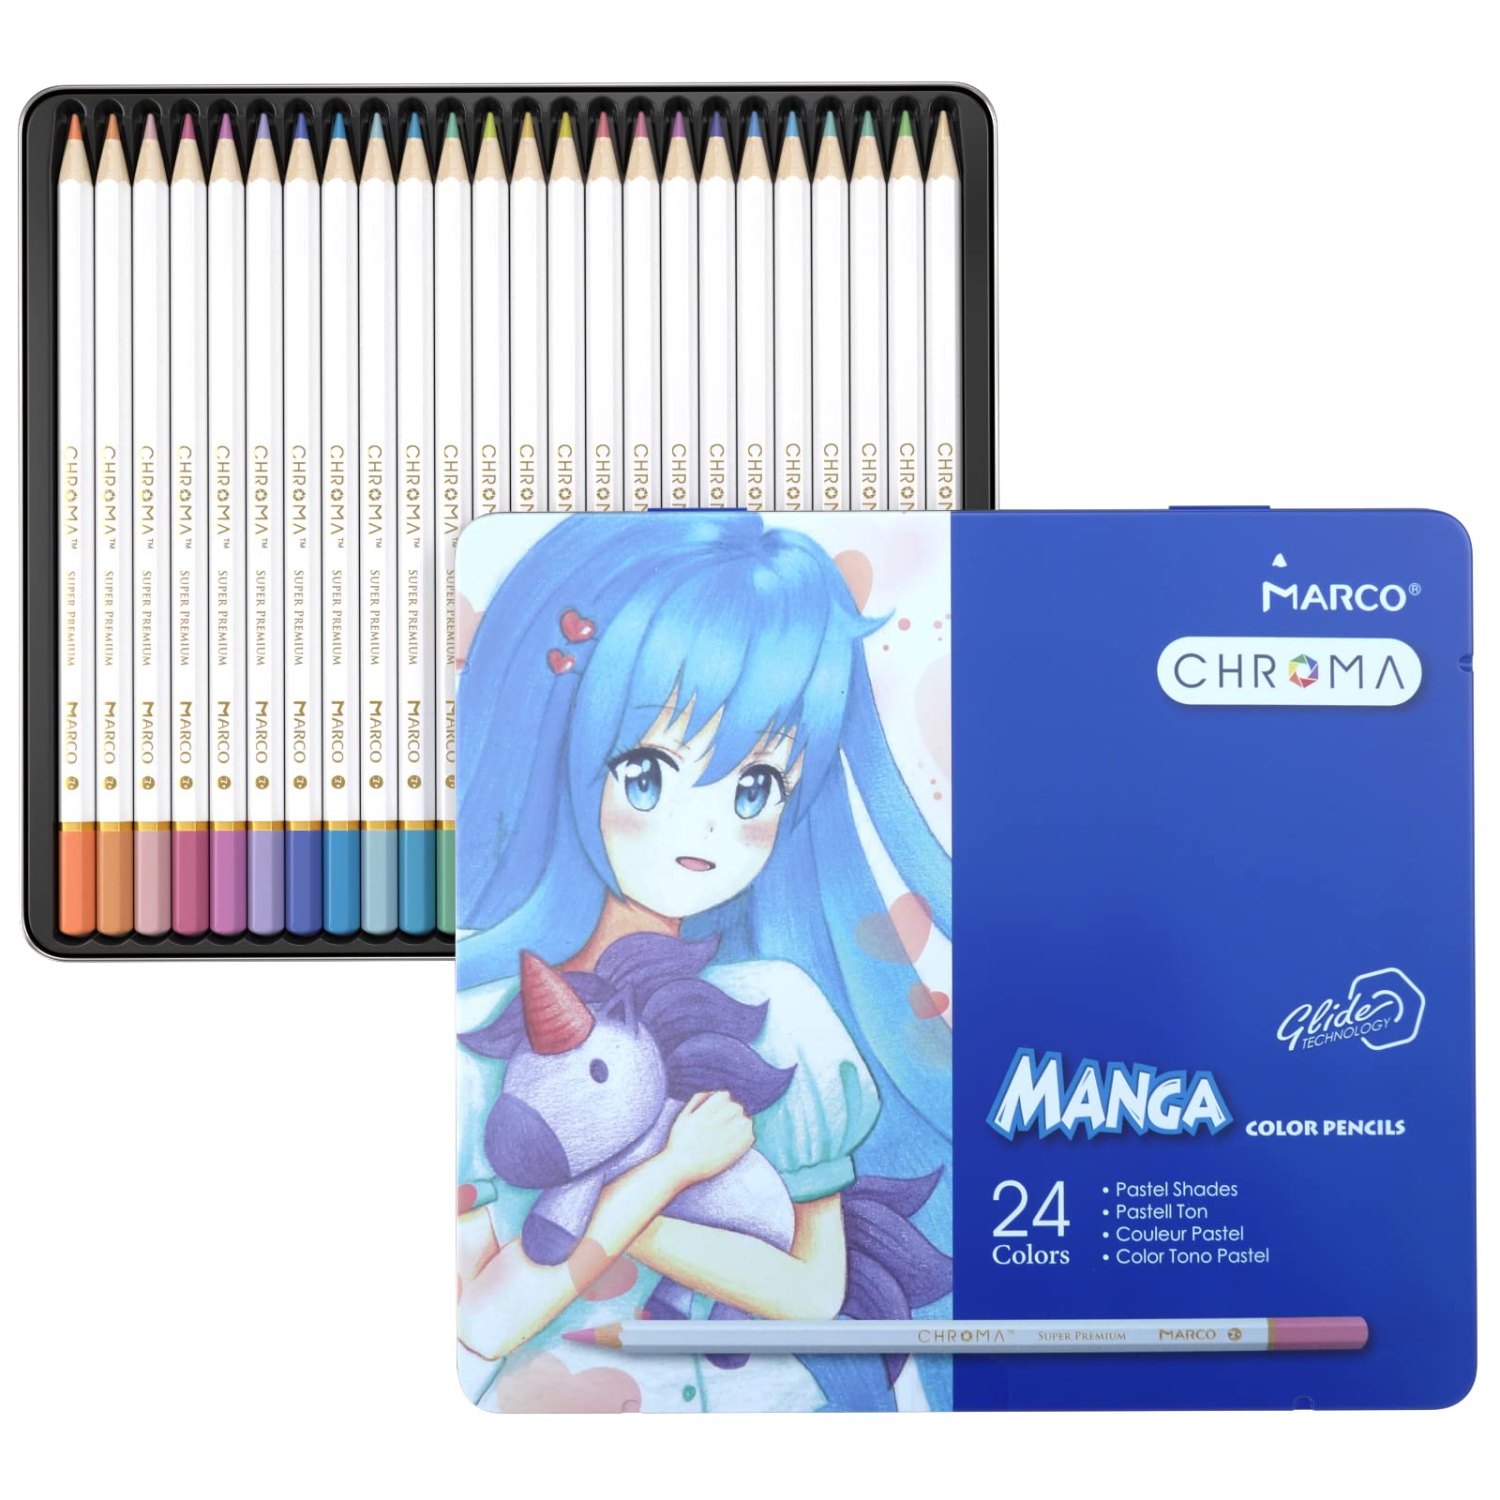 Chroma Manga 24 Count Set of Pastel Colors Colored Pencils in Metal Box - Professional Drawing Supplies for Kids, Adults, Artists - 2B Hardness - Ideal for Art, Sketching, and Draw